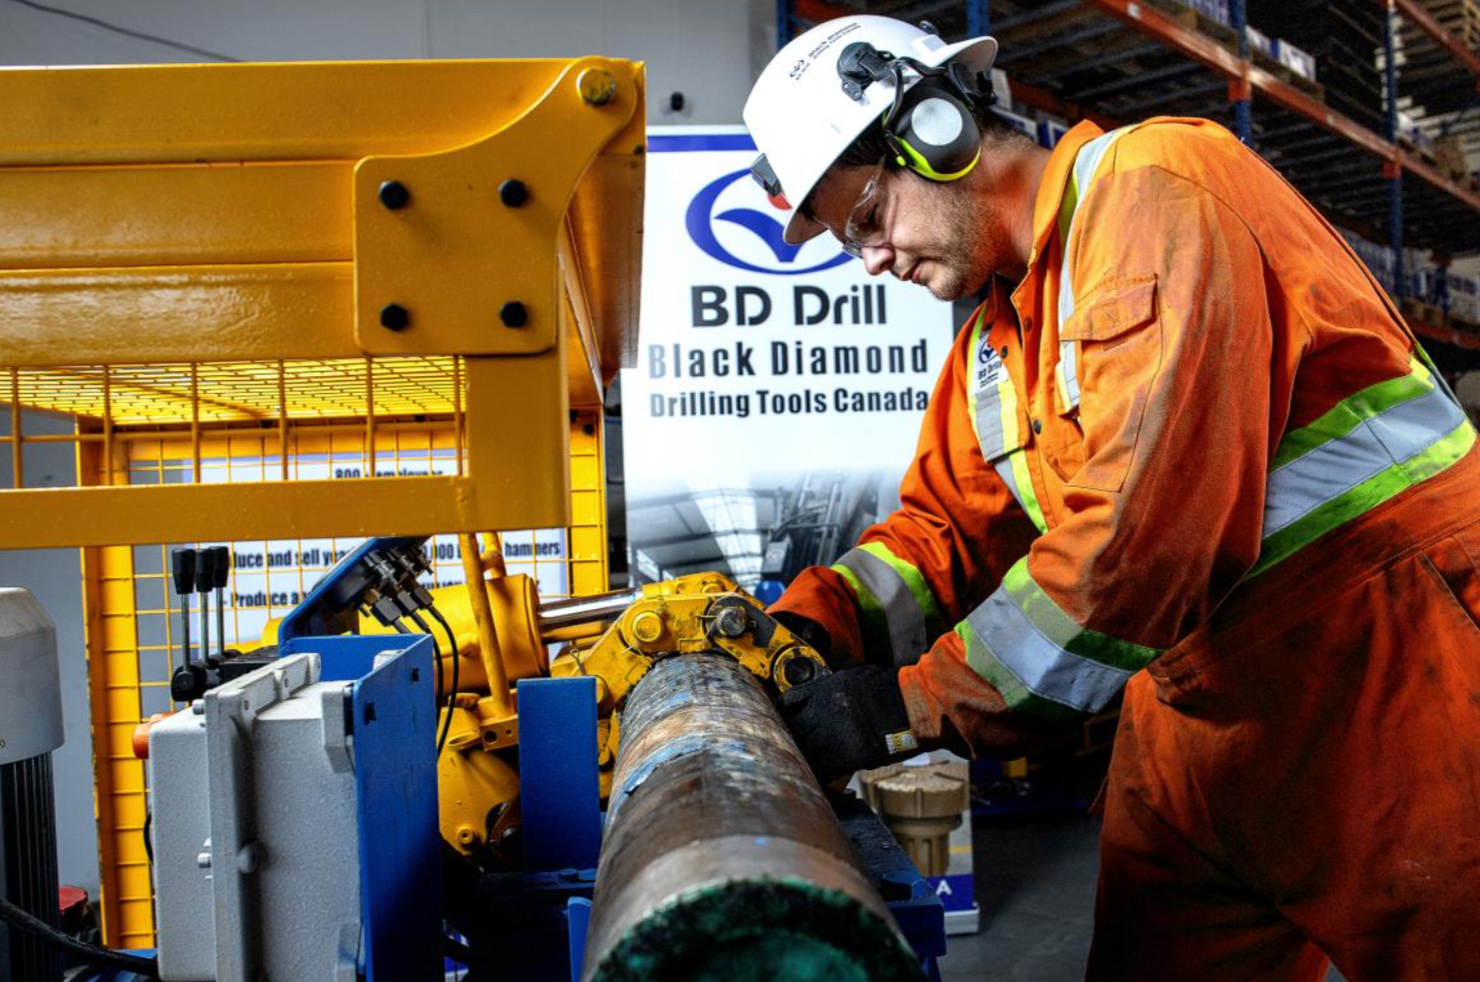 Black Diamond Drilling Breakout Bench in Operation